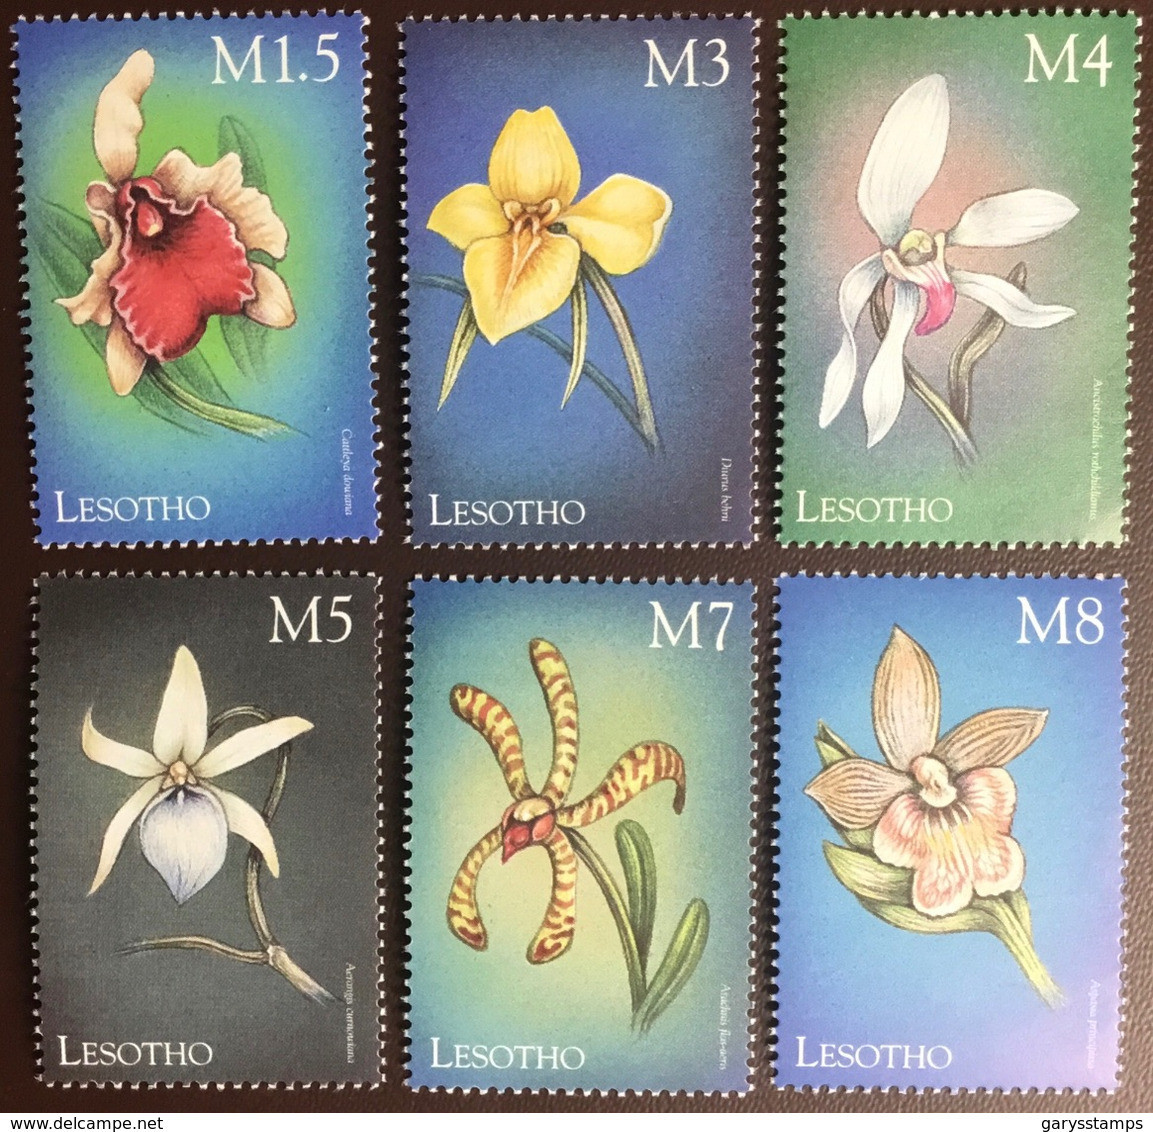 Lesotho 1999 Orchids Flowers MNH - Orchideen